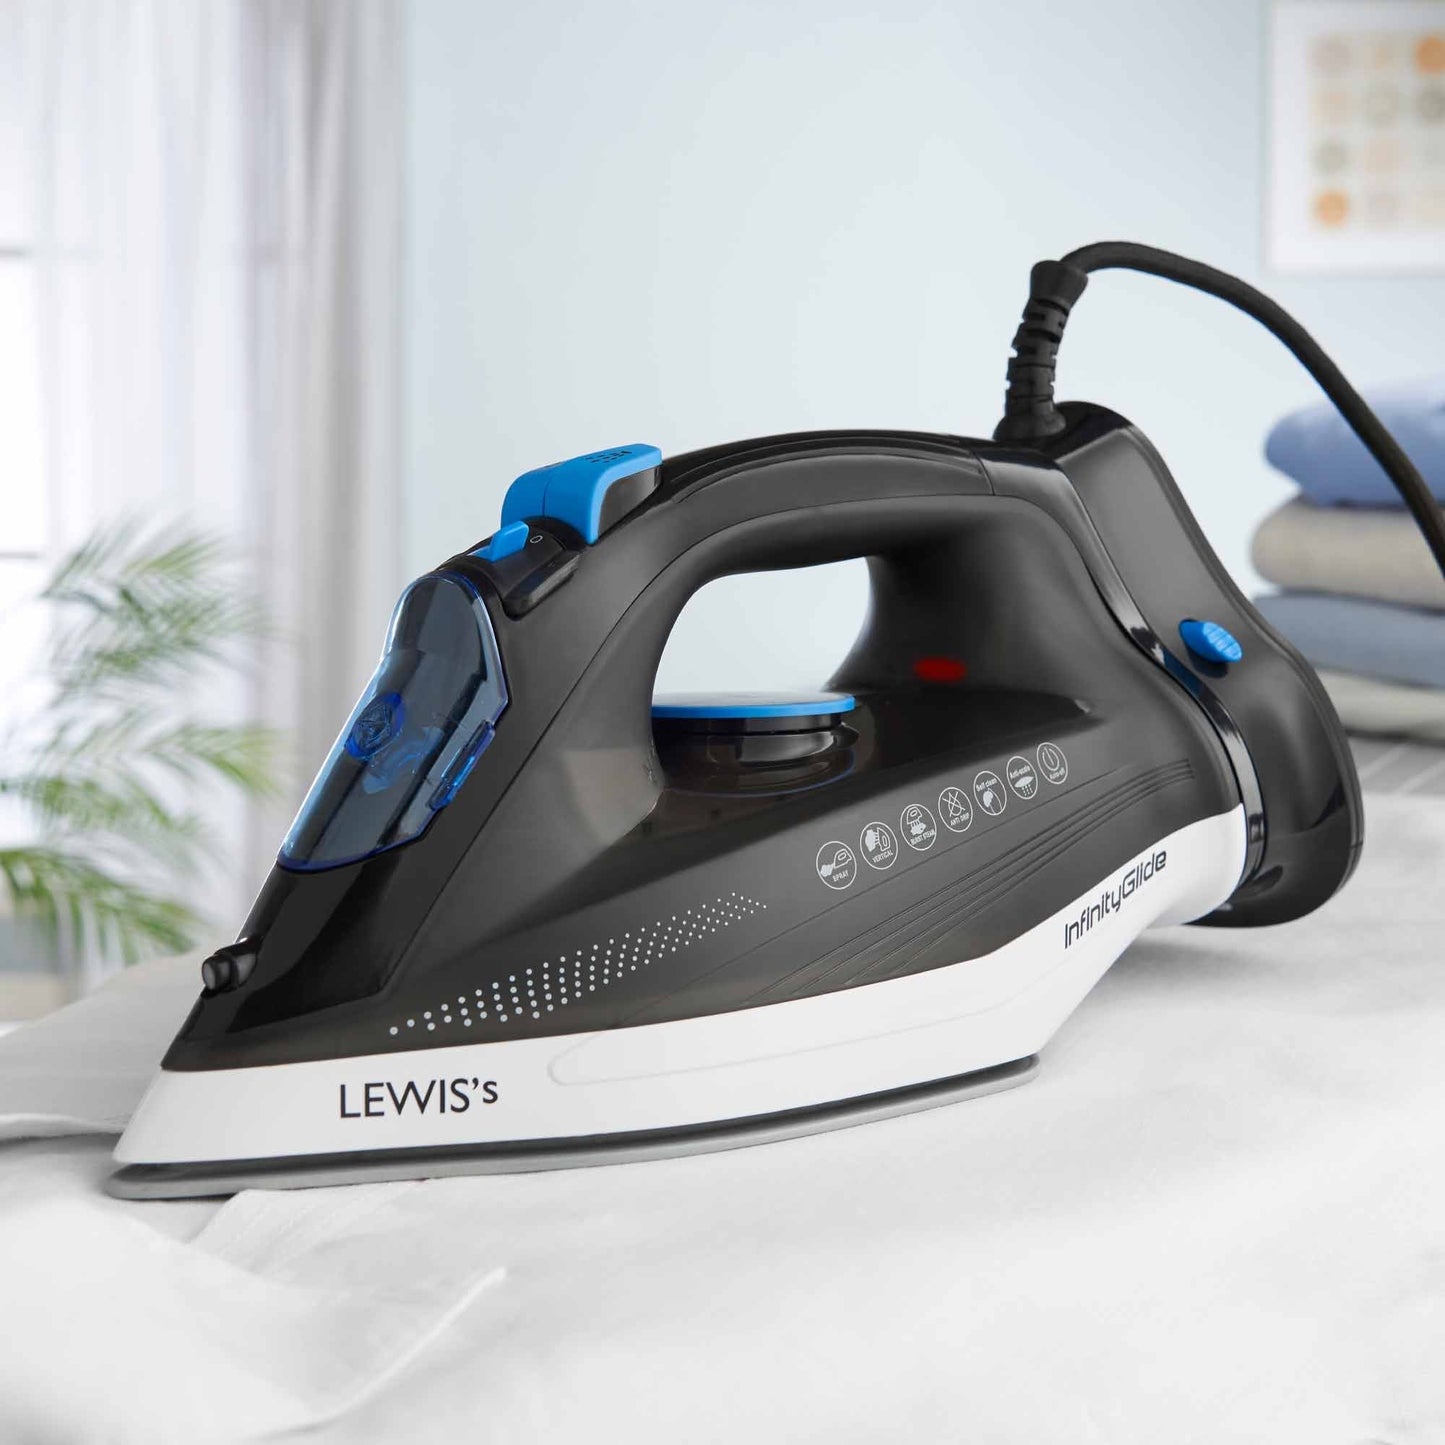 Infinity Glide 2400W Cord/Cordless Steam Iron Home Clothing Laundry Appliance